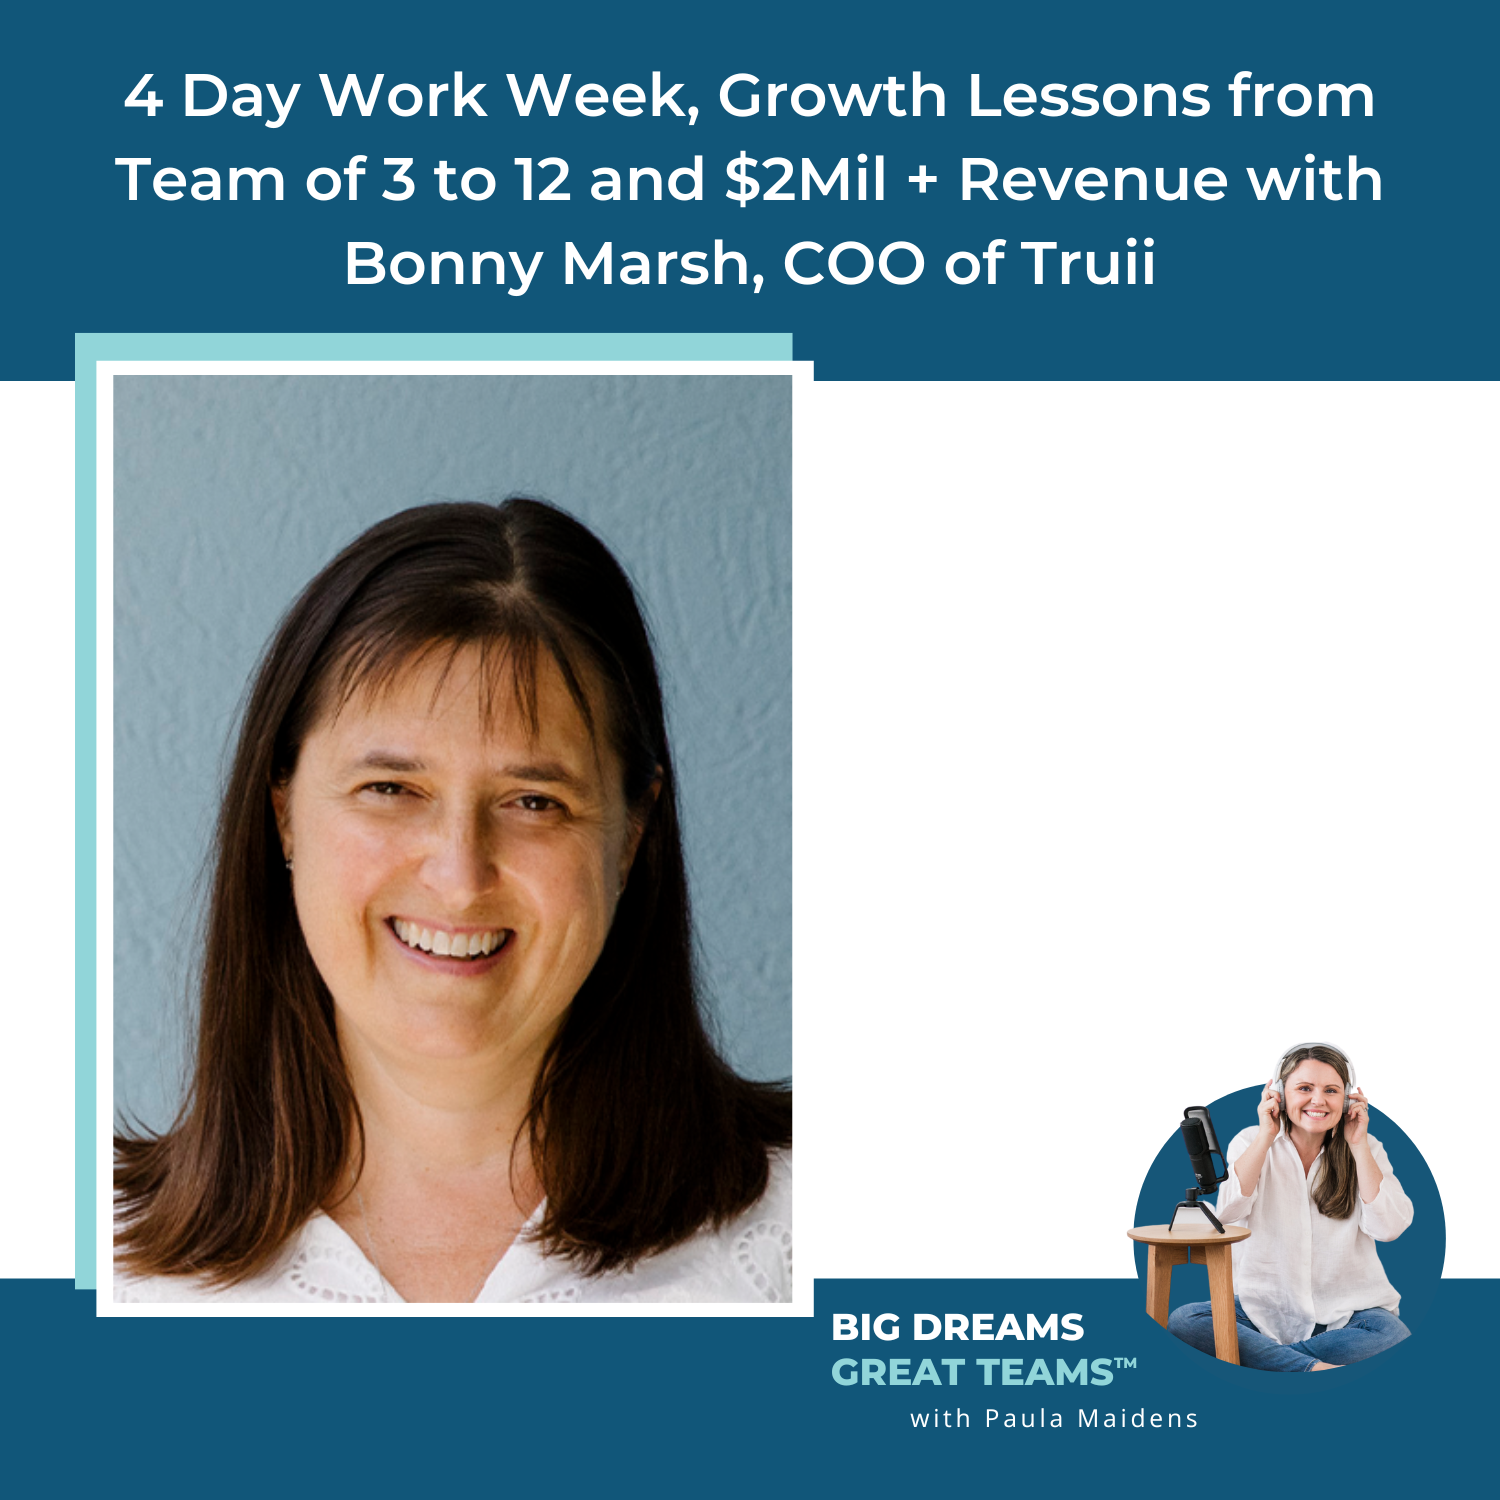 Episode #104 - 4 Day Work Week, Growth Lessons from Team of 3 to 12 and $2Mil + Revenue with Bonny Marsh, COO of Truii